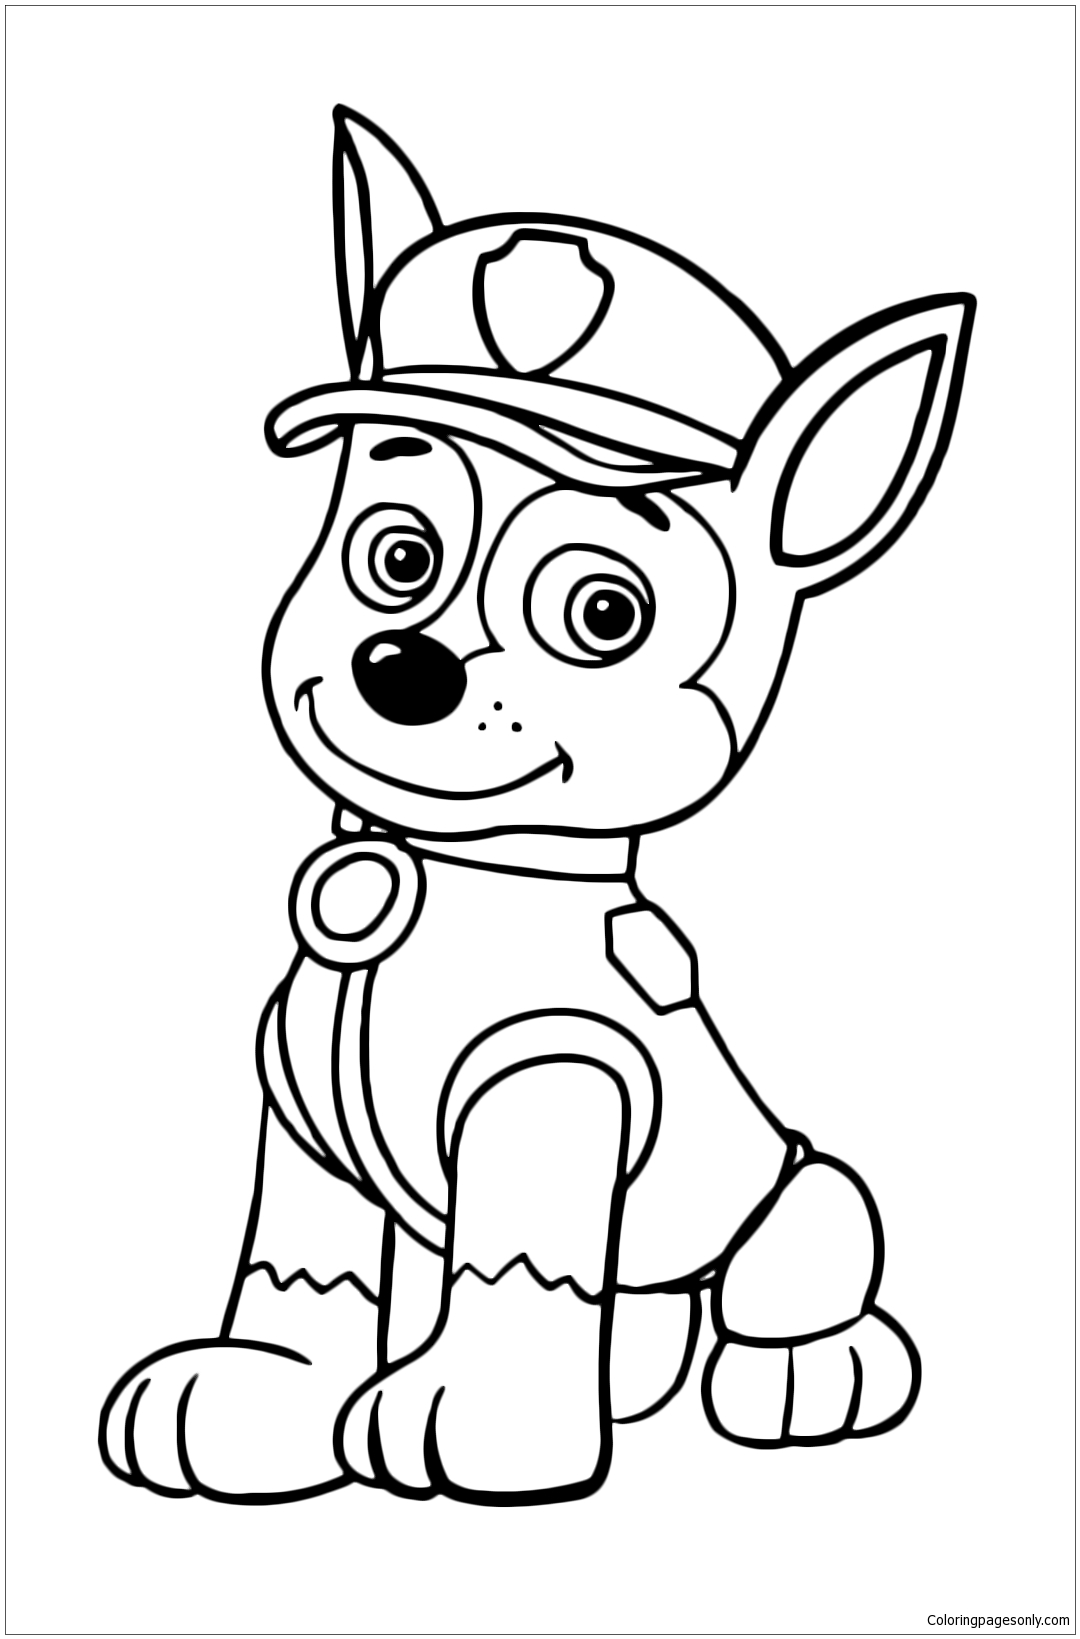 Chase The Police Dog Is Resting Sitting Coloring Page - Free Coloring